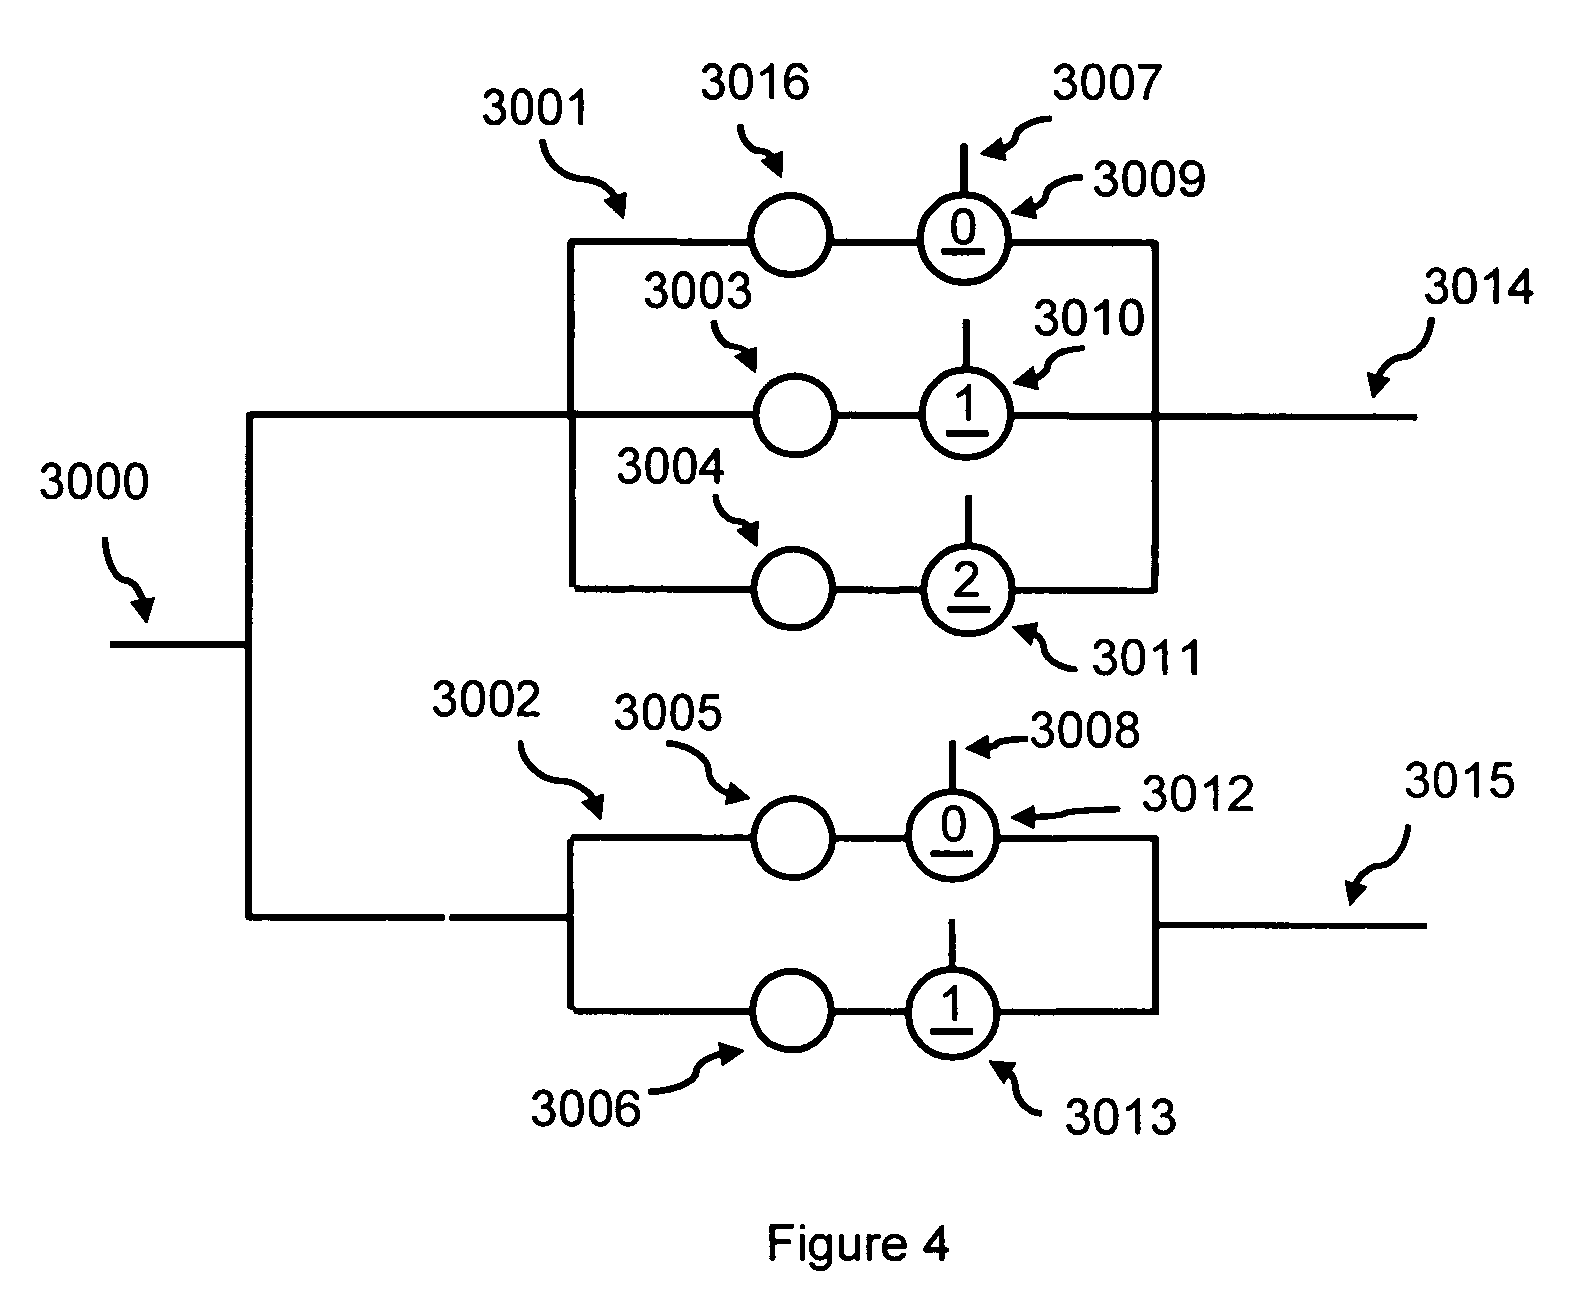 Multi-value digital calculating circuits, including multipliers